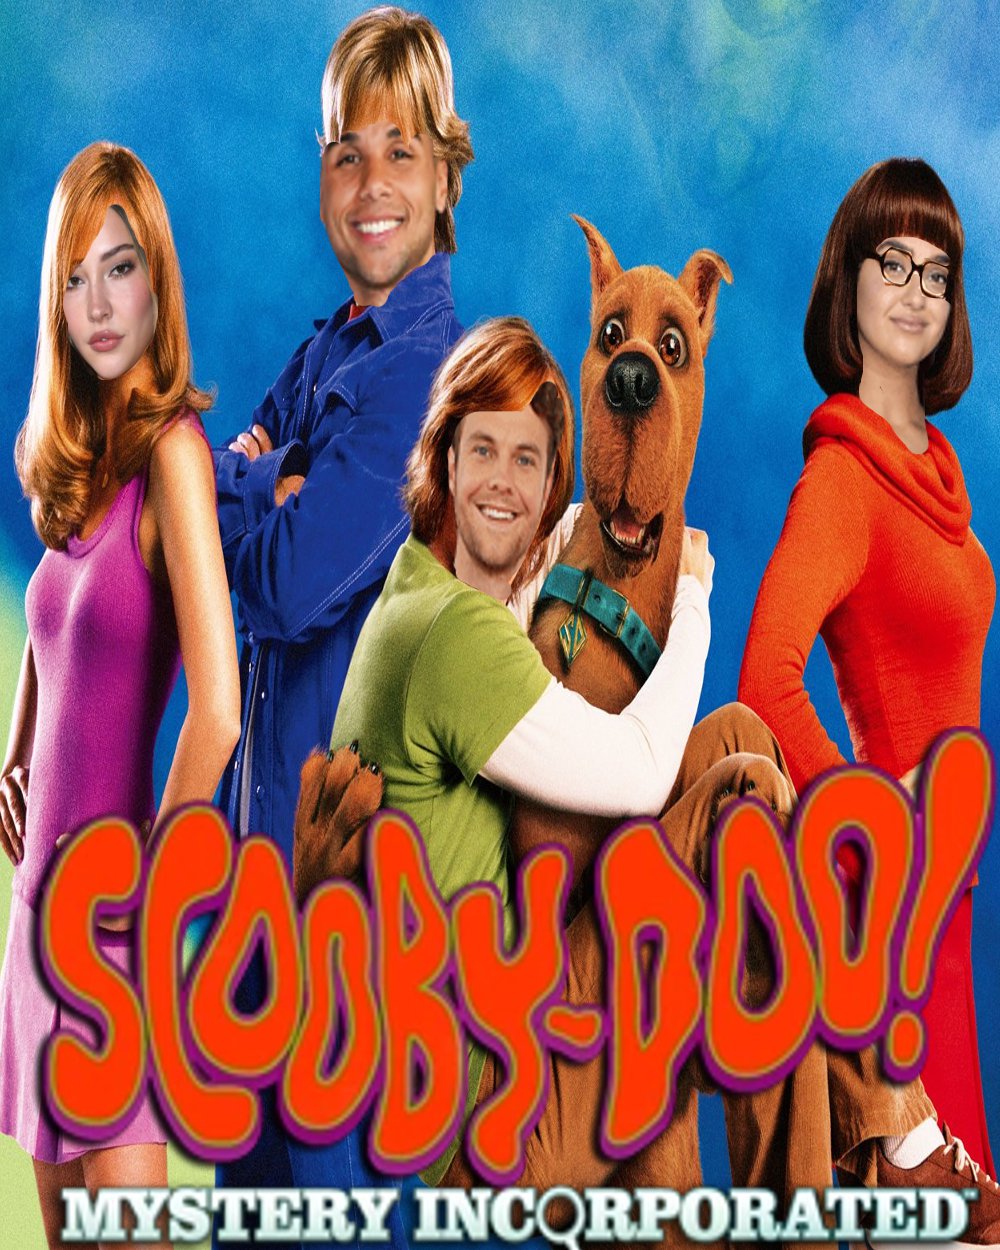 Scooby-Doo Mystery Incorporated poster by SteveIrwinFan96 on DeviantArt